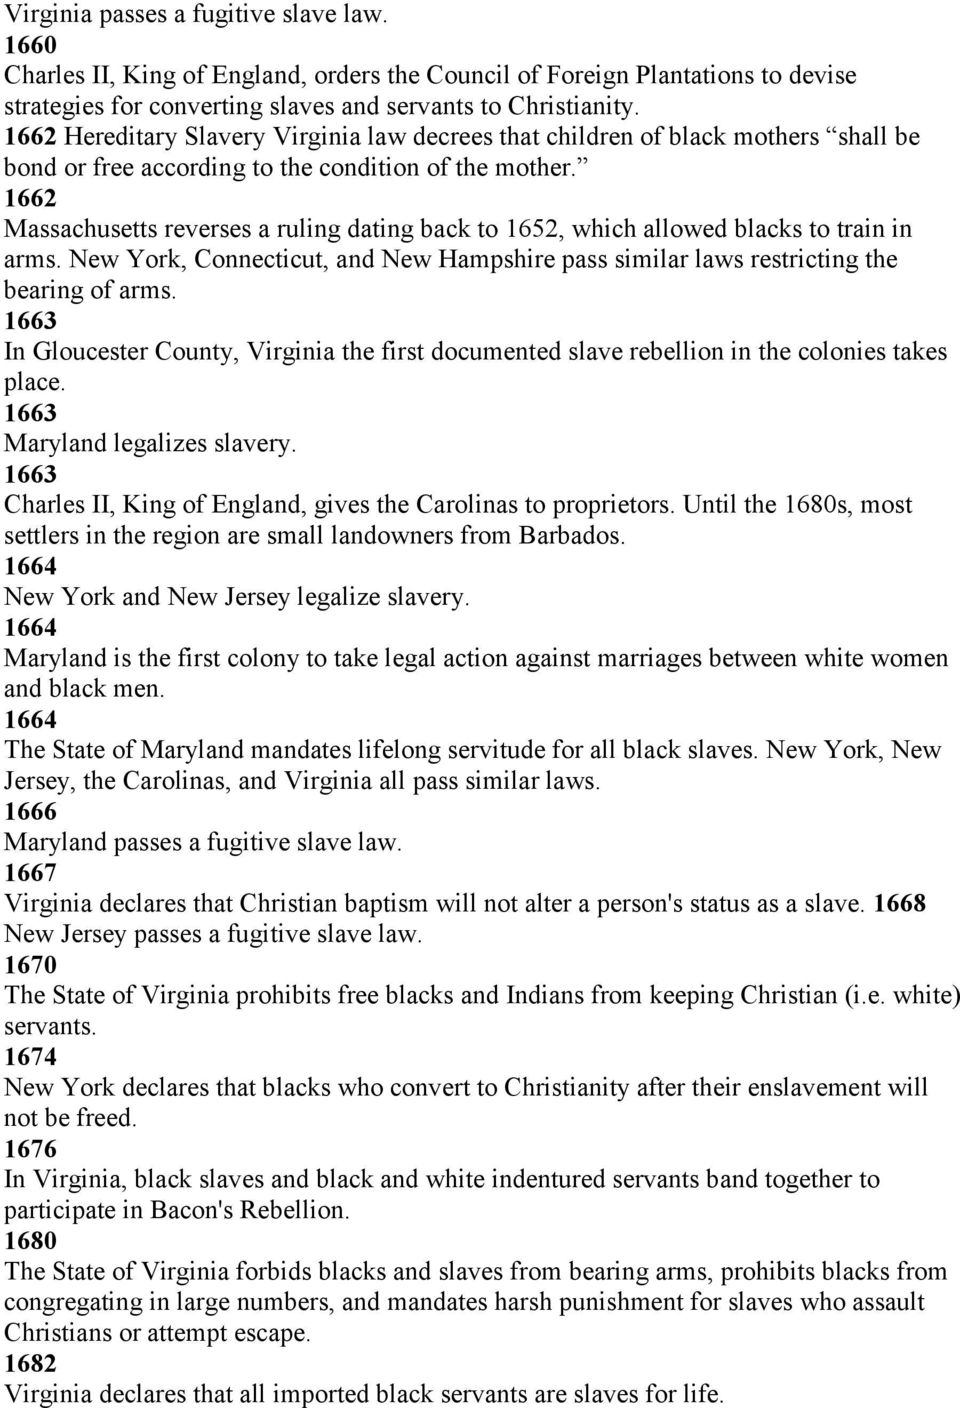 1662 Massachusetts reverses a ruling dating back to 1652, which allowed blacks to train in arms. New York, Connecticut, and New Hampshire pass similar laws restricting the bearing of arms.